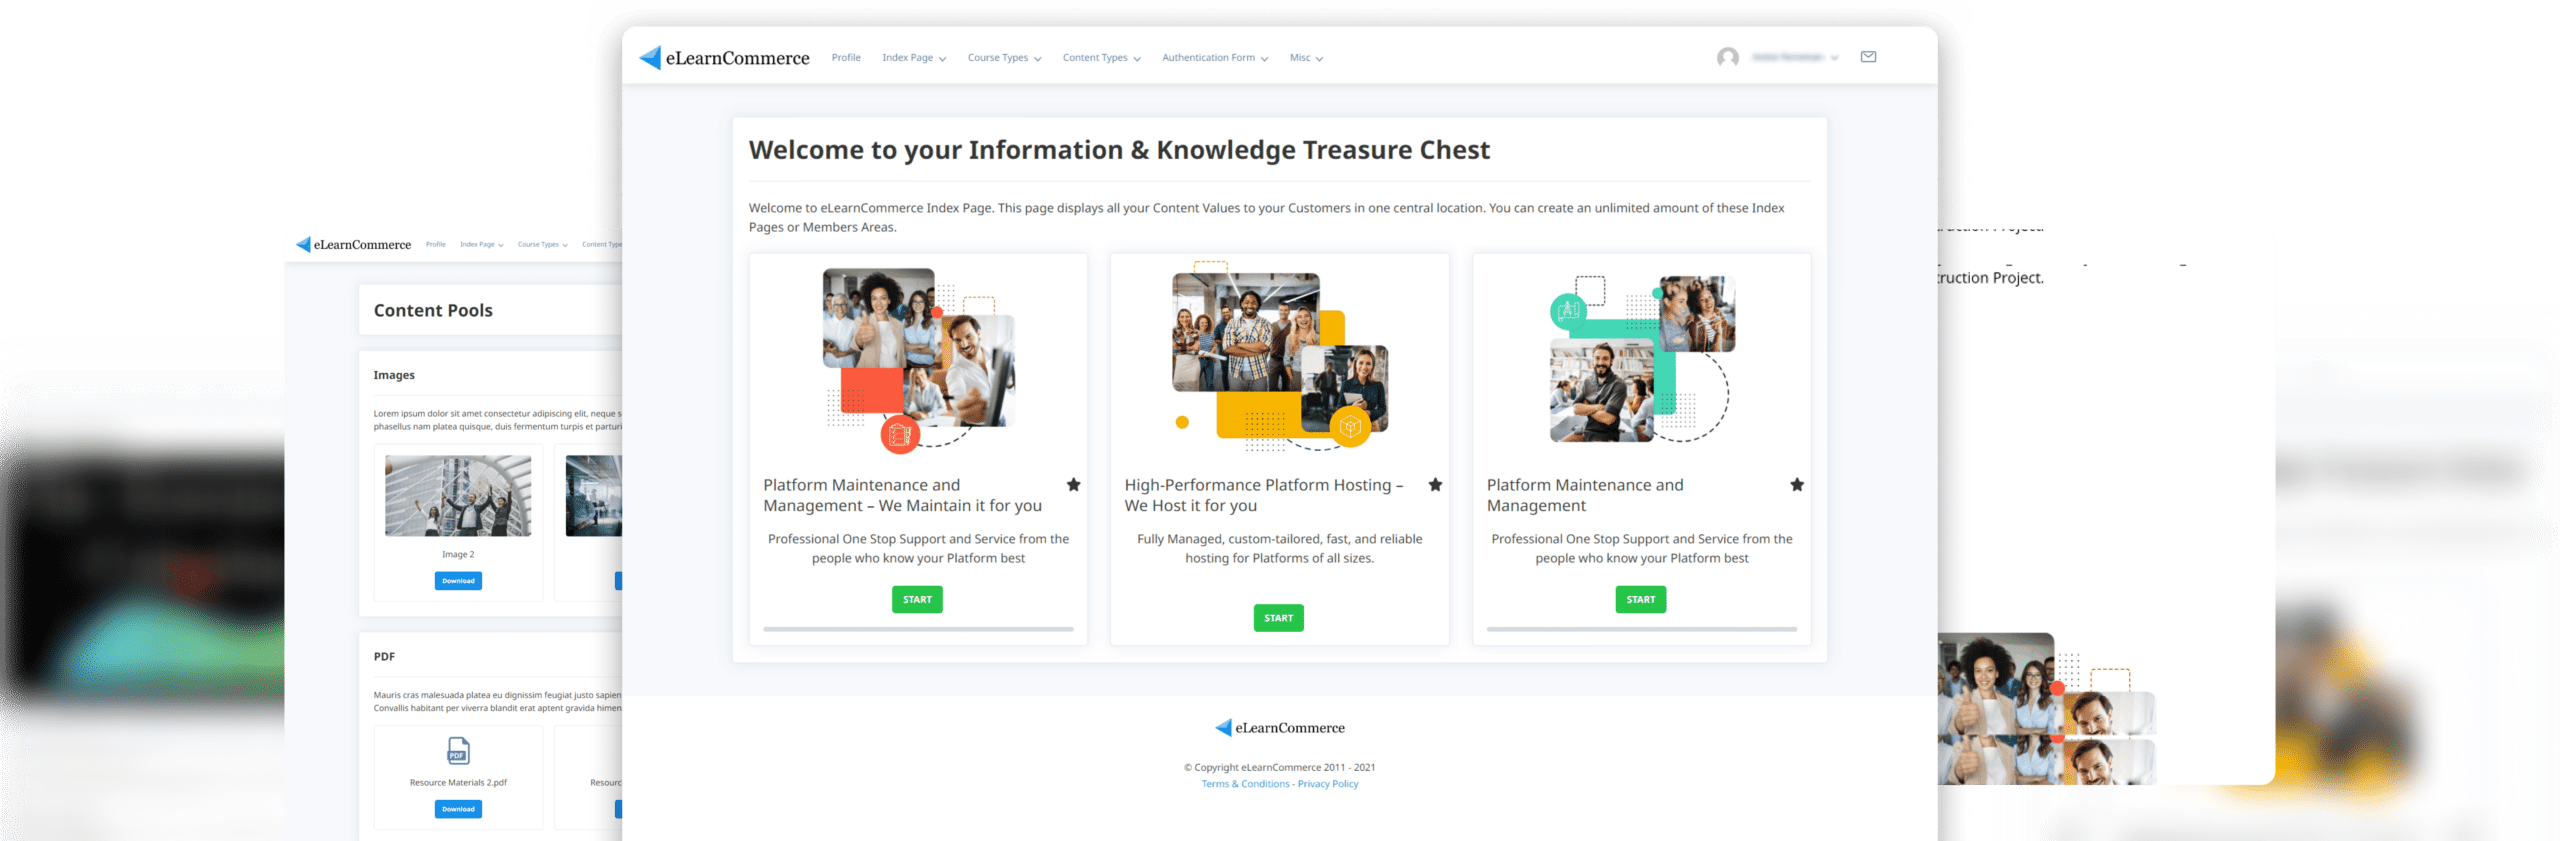 elearncommerce under overview image